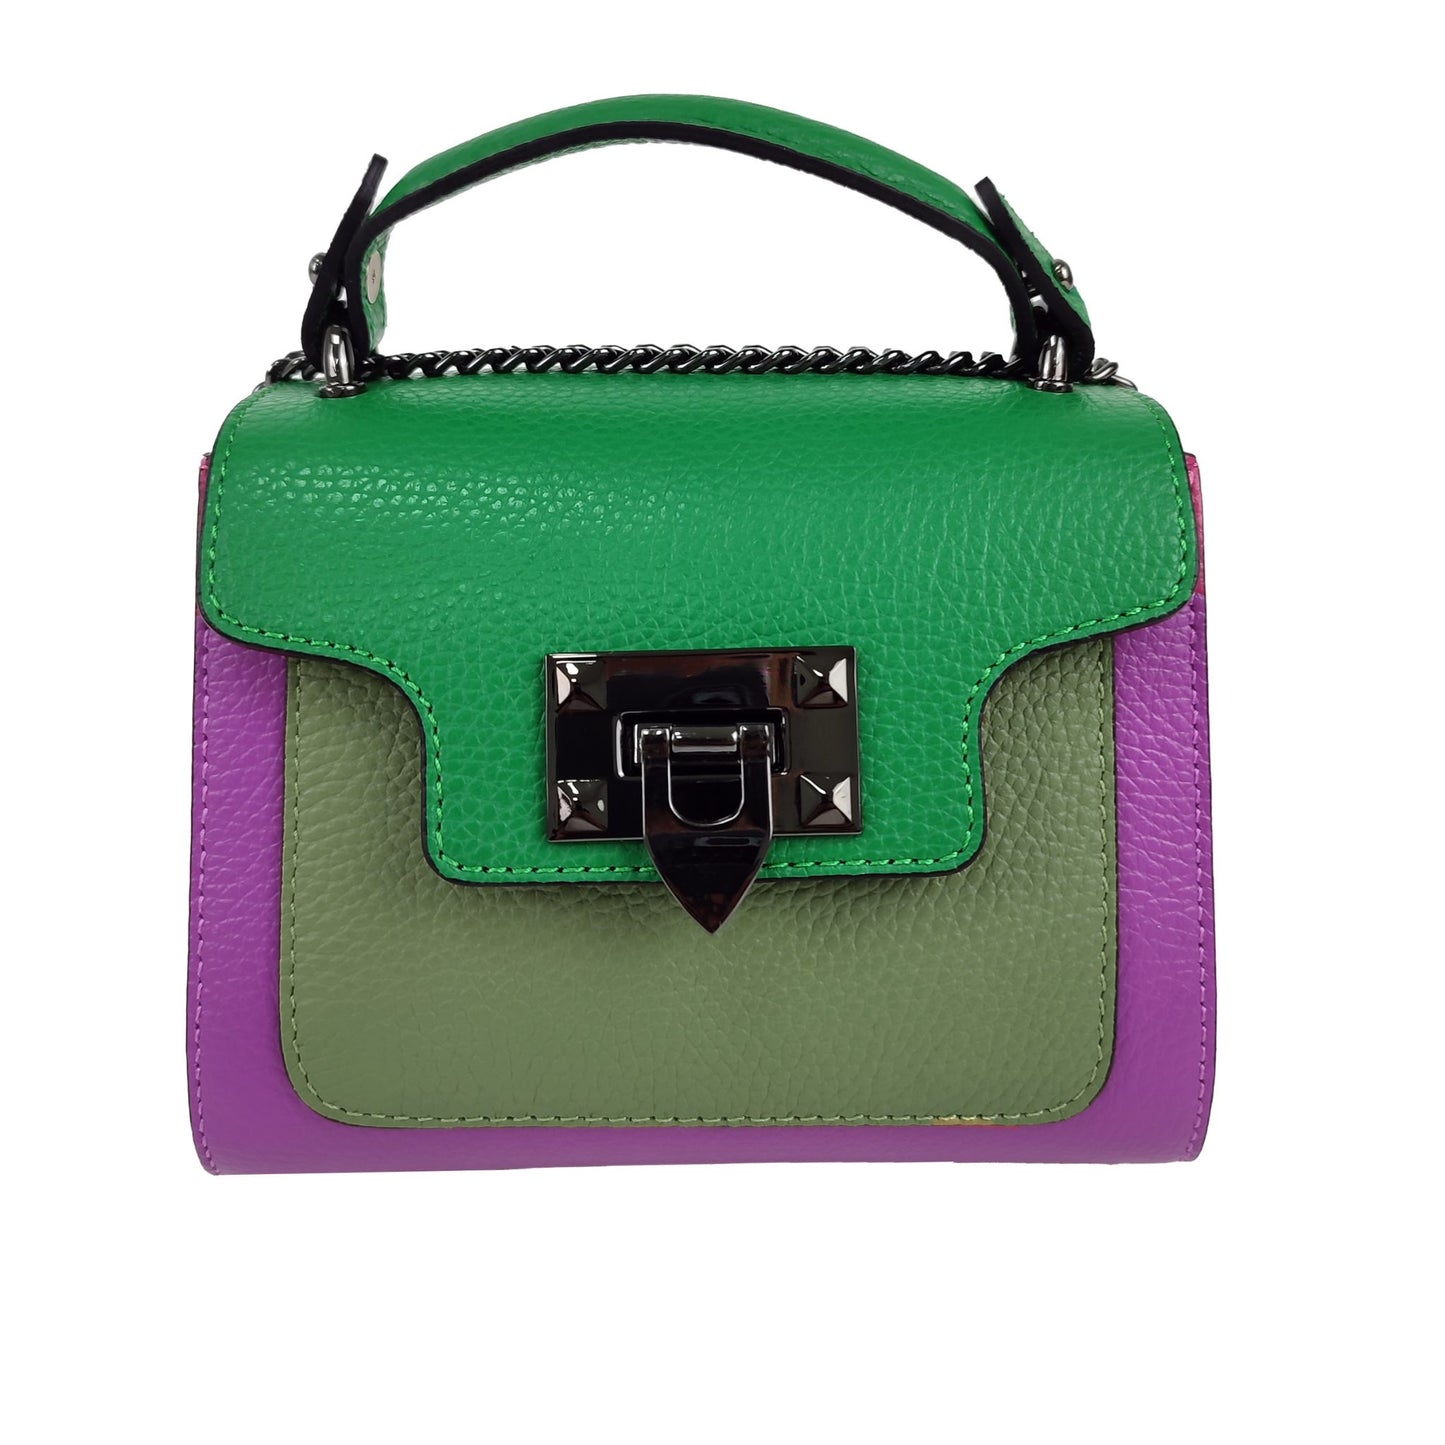 The Colour Block Leather handheld bag